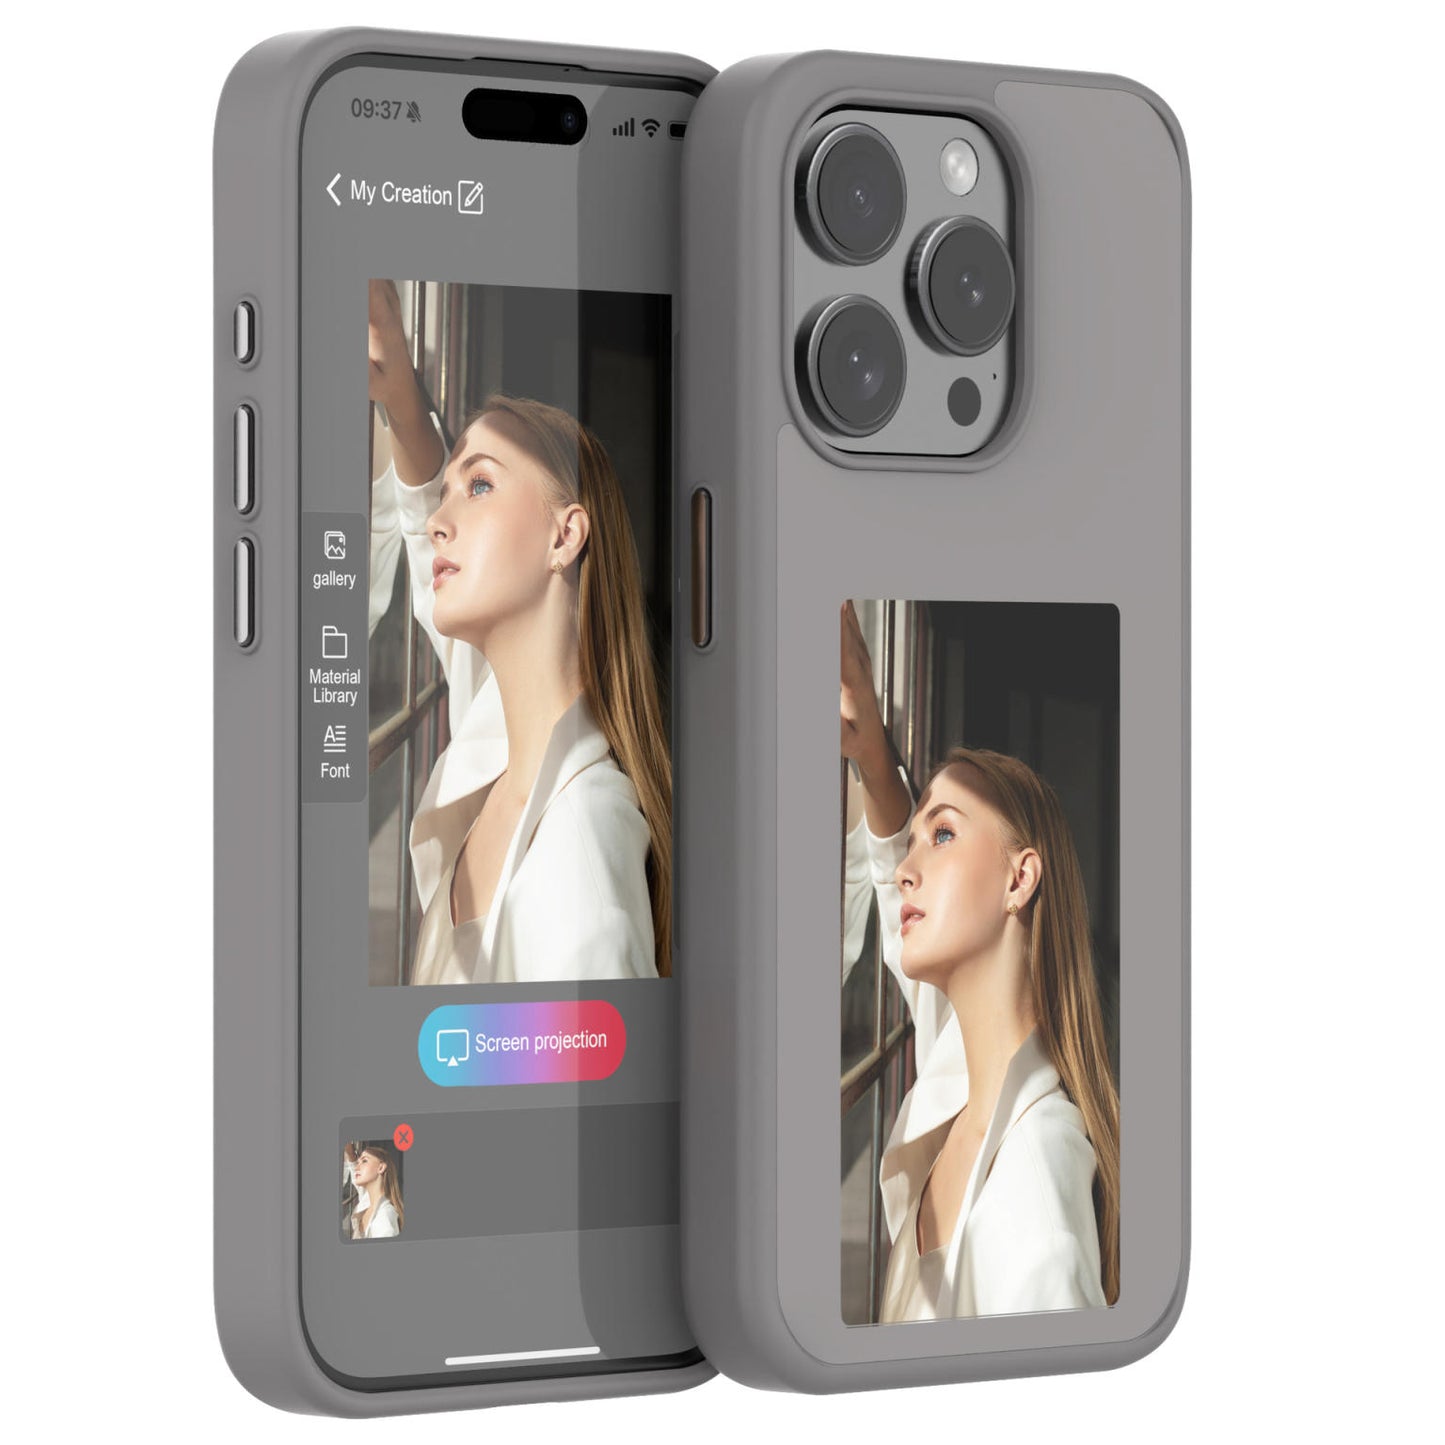 PhotoInk Case - The Original E-Ink Case for iPhone (3-ink)